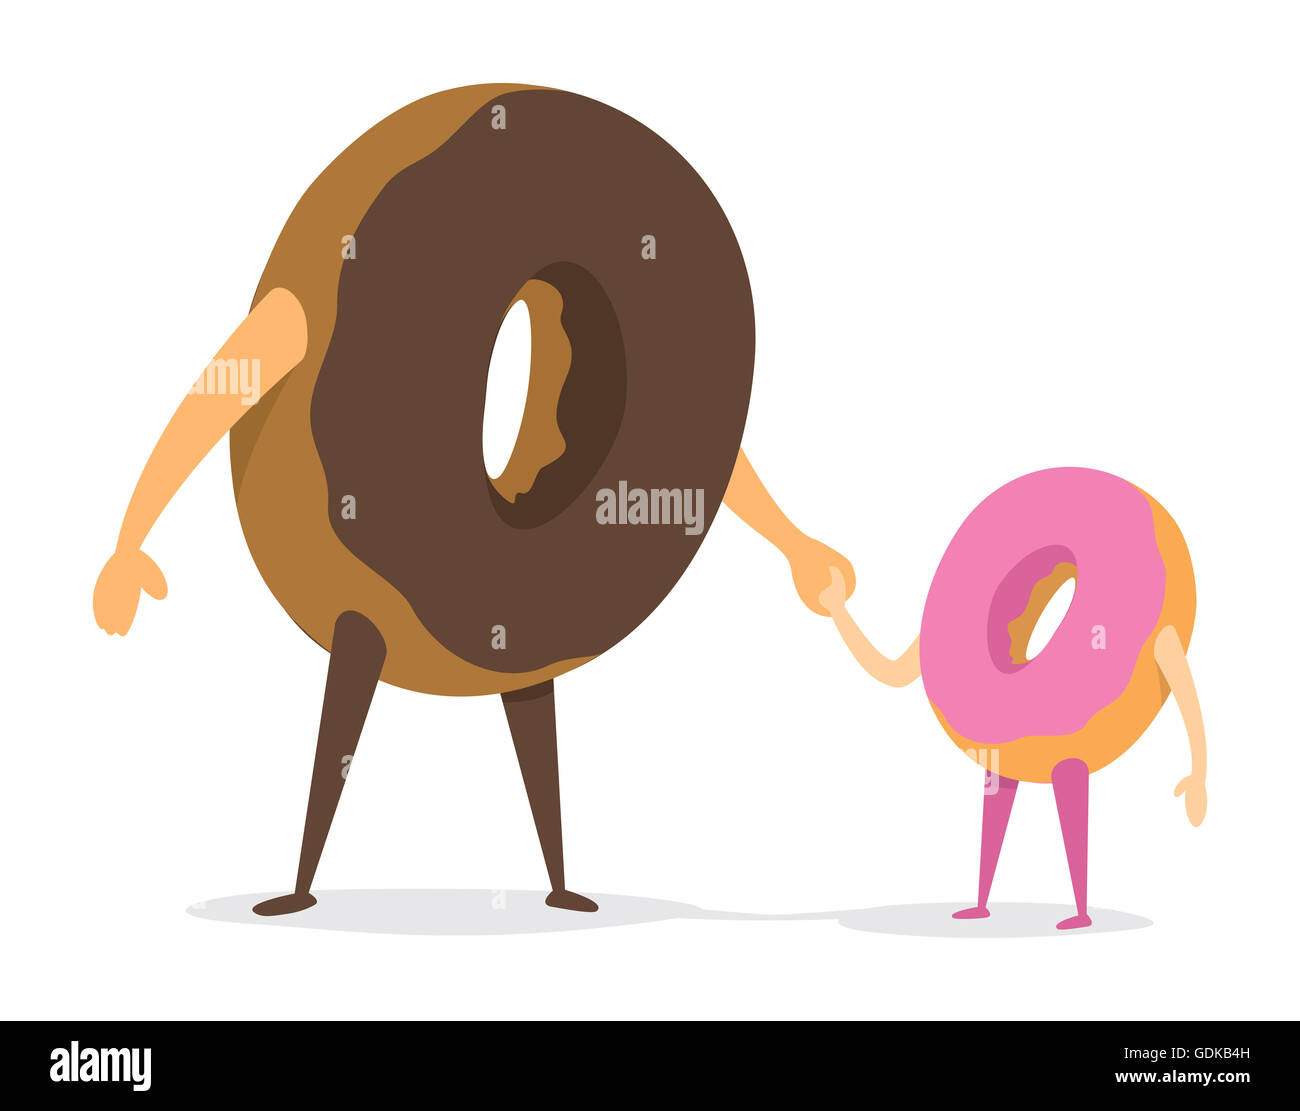 Cartoon illustration of cute donut father and daughter holding hands Stock Photo